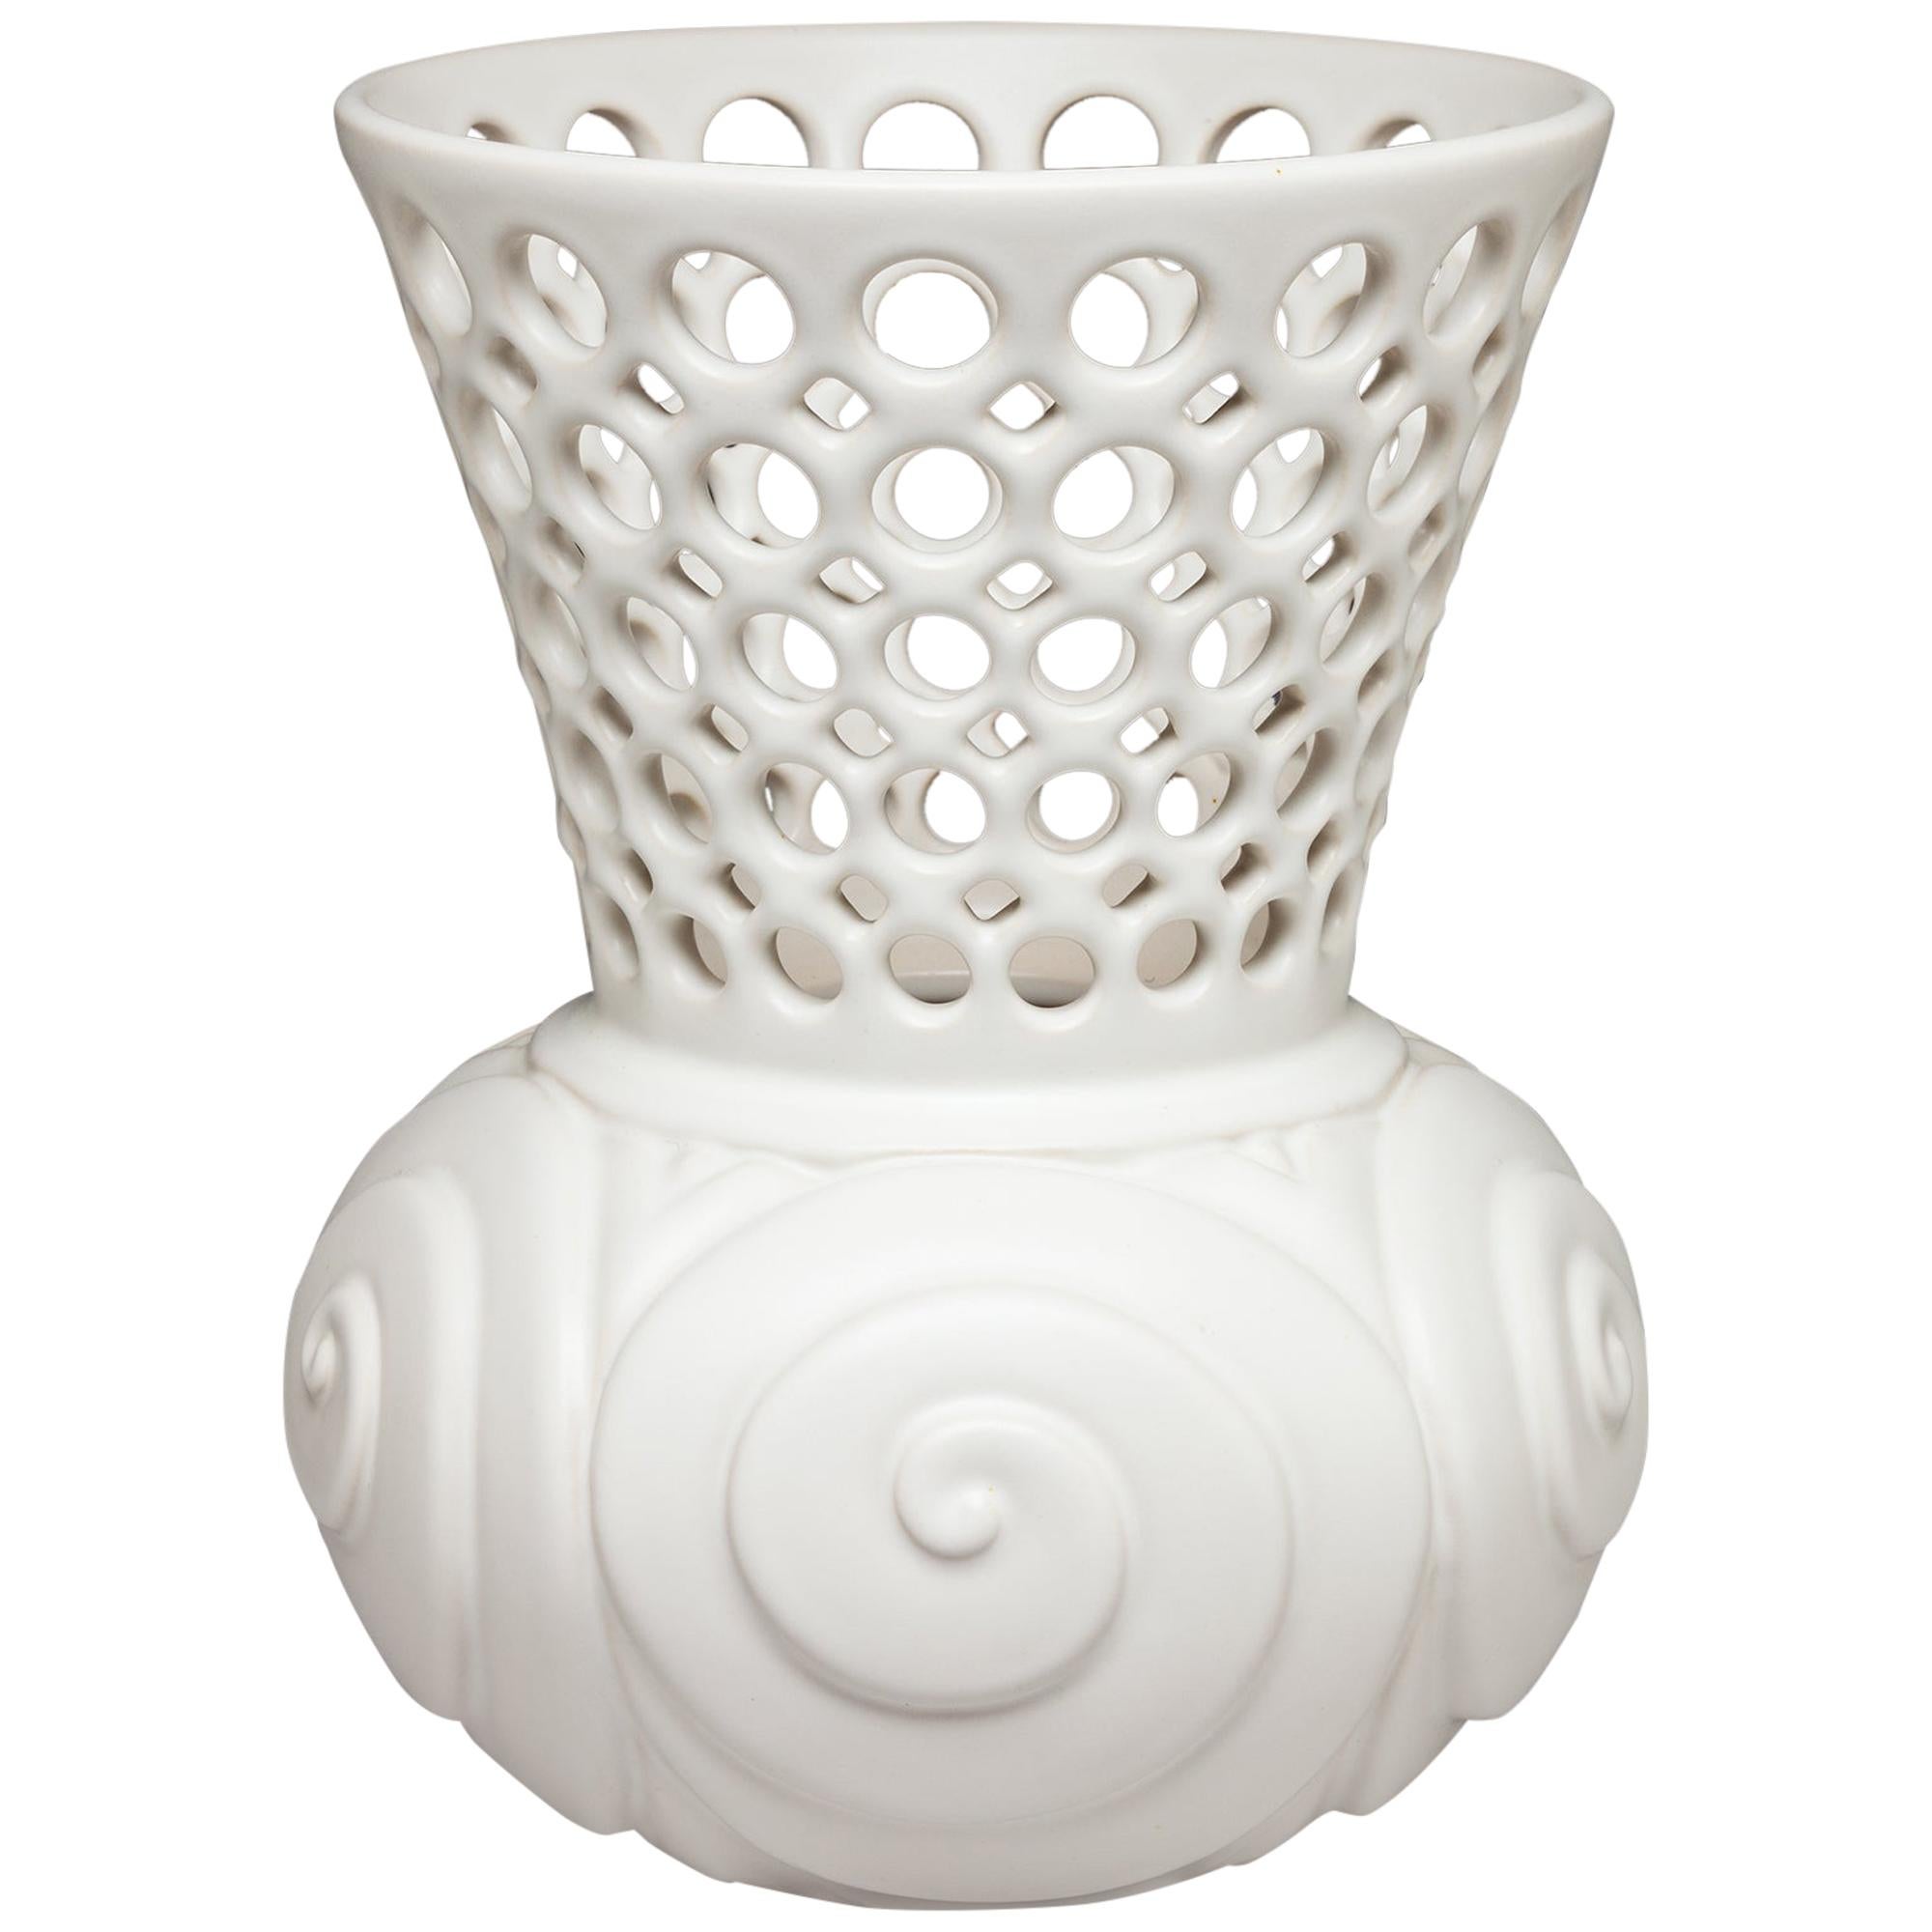 White Ceramic Carved with Circular Pierced Pattern Vase or Vessel, In Stock